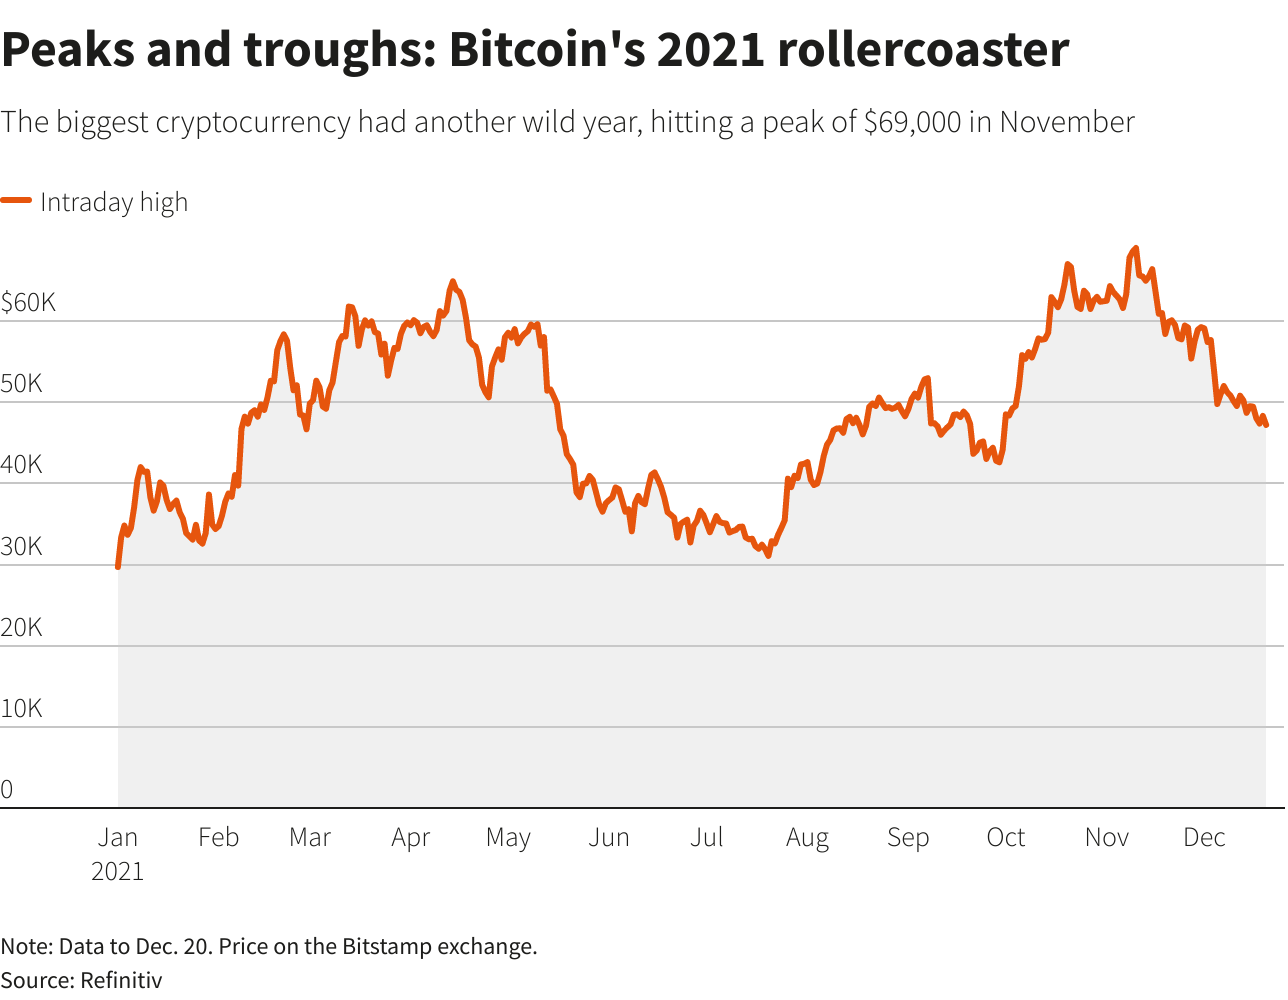 Peaks and troughs: Bitcoin's 2021 rollercoaster